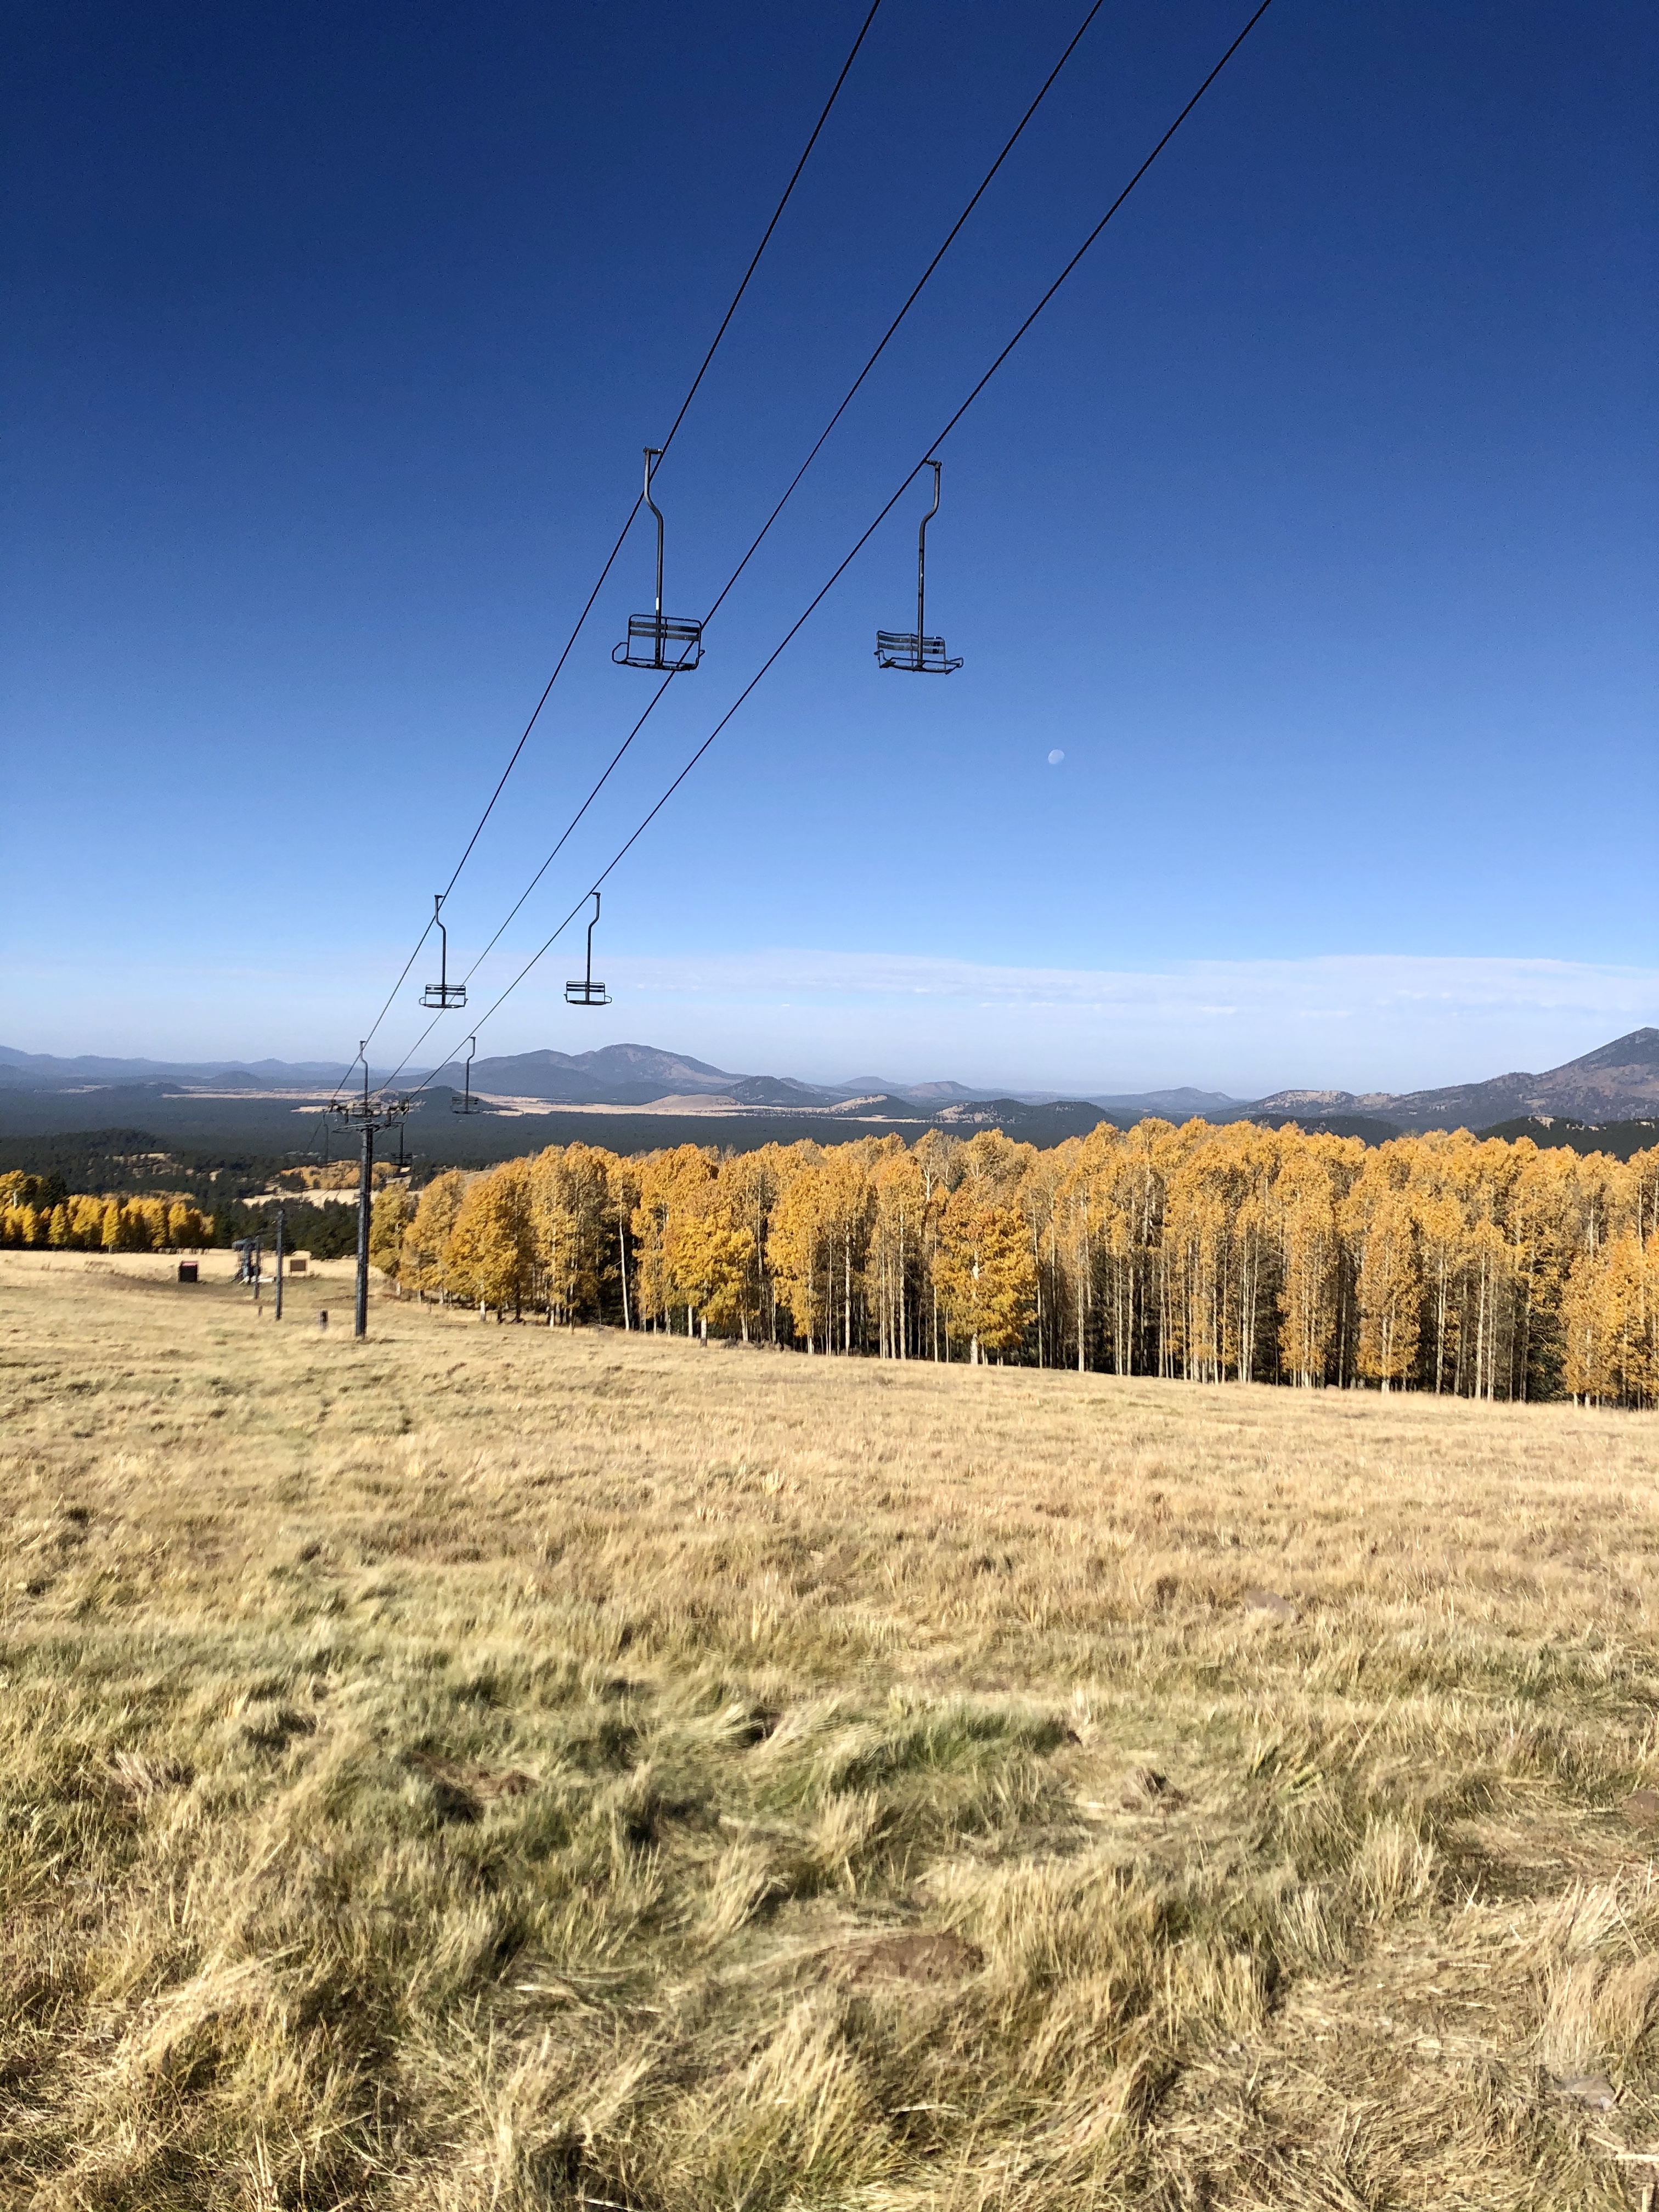 Chair lifts at snowbowl over aspens